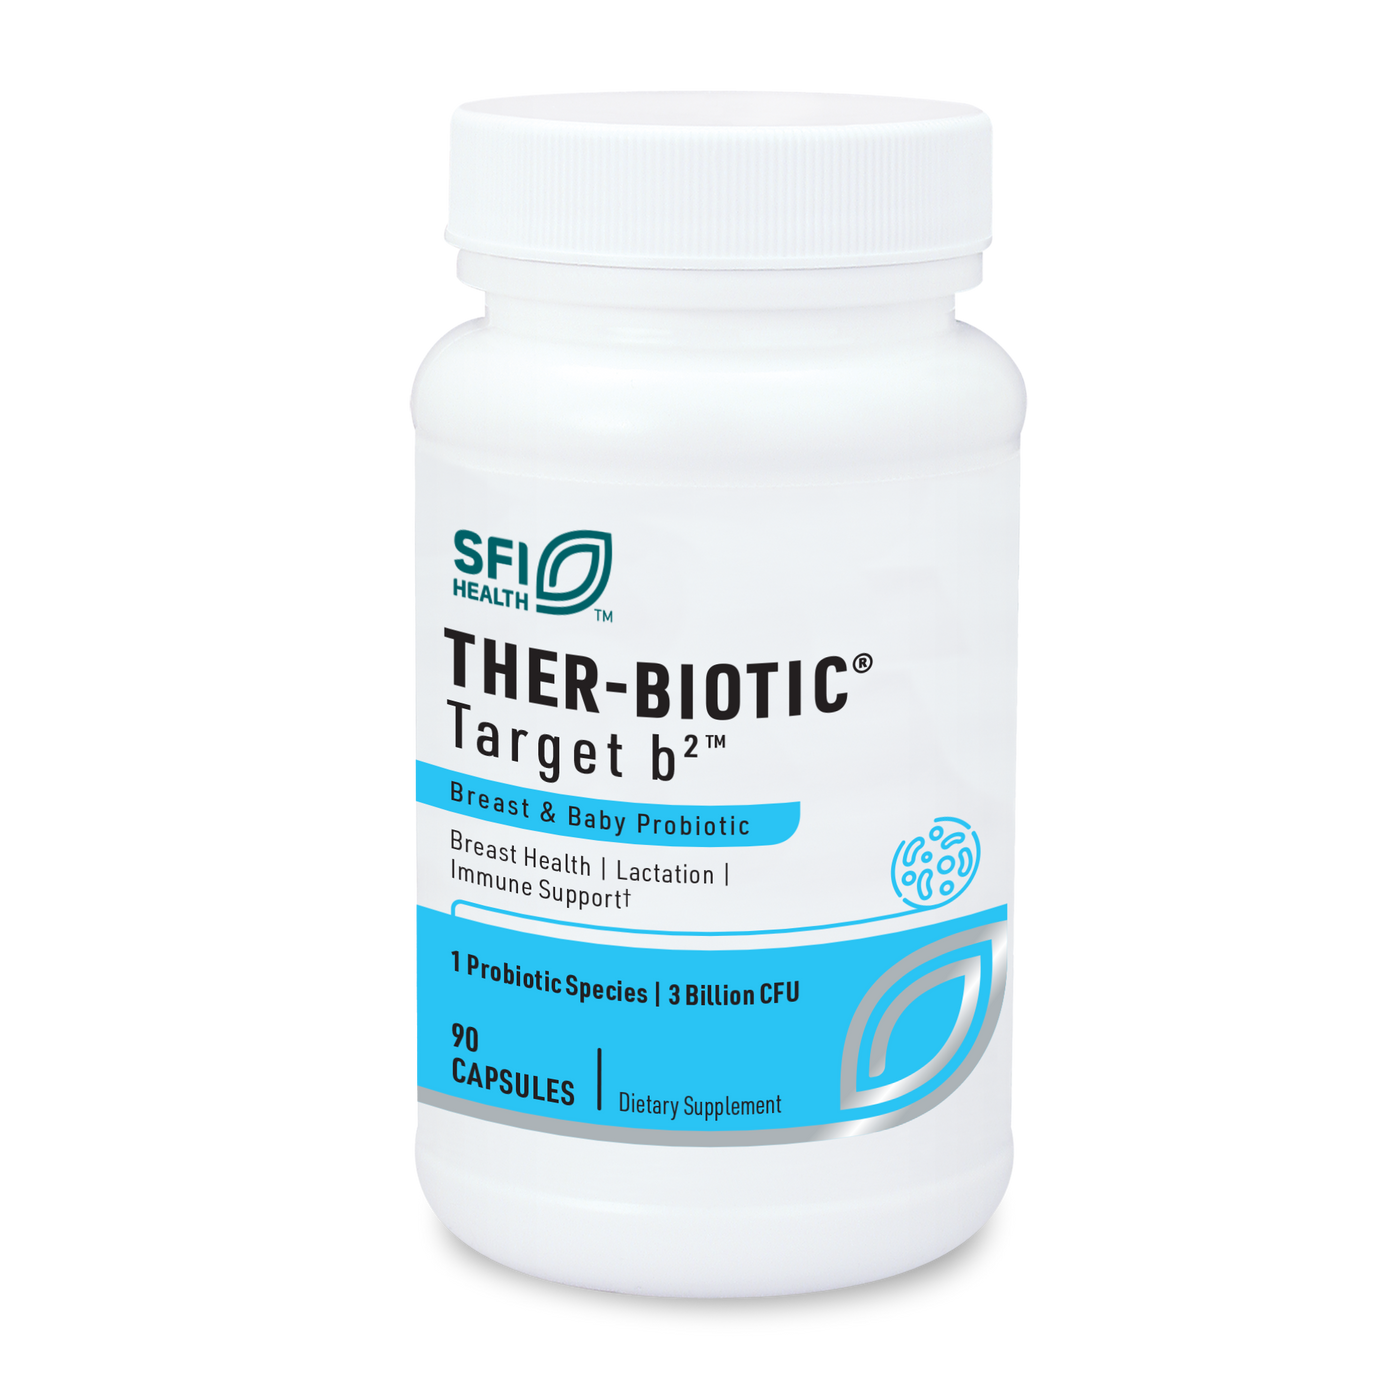 Ther-Biotic® Target b2™  Curated Wellness